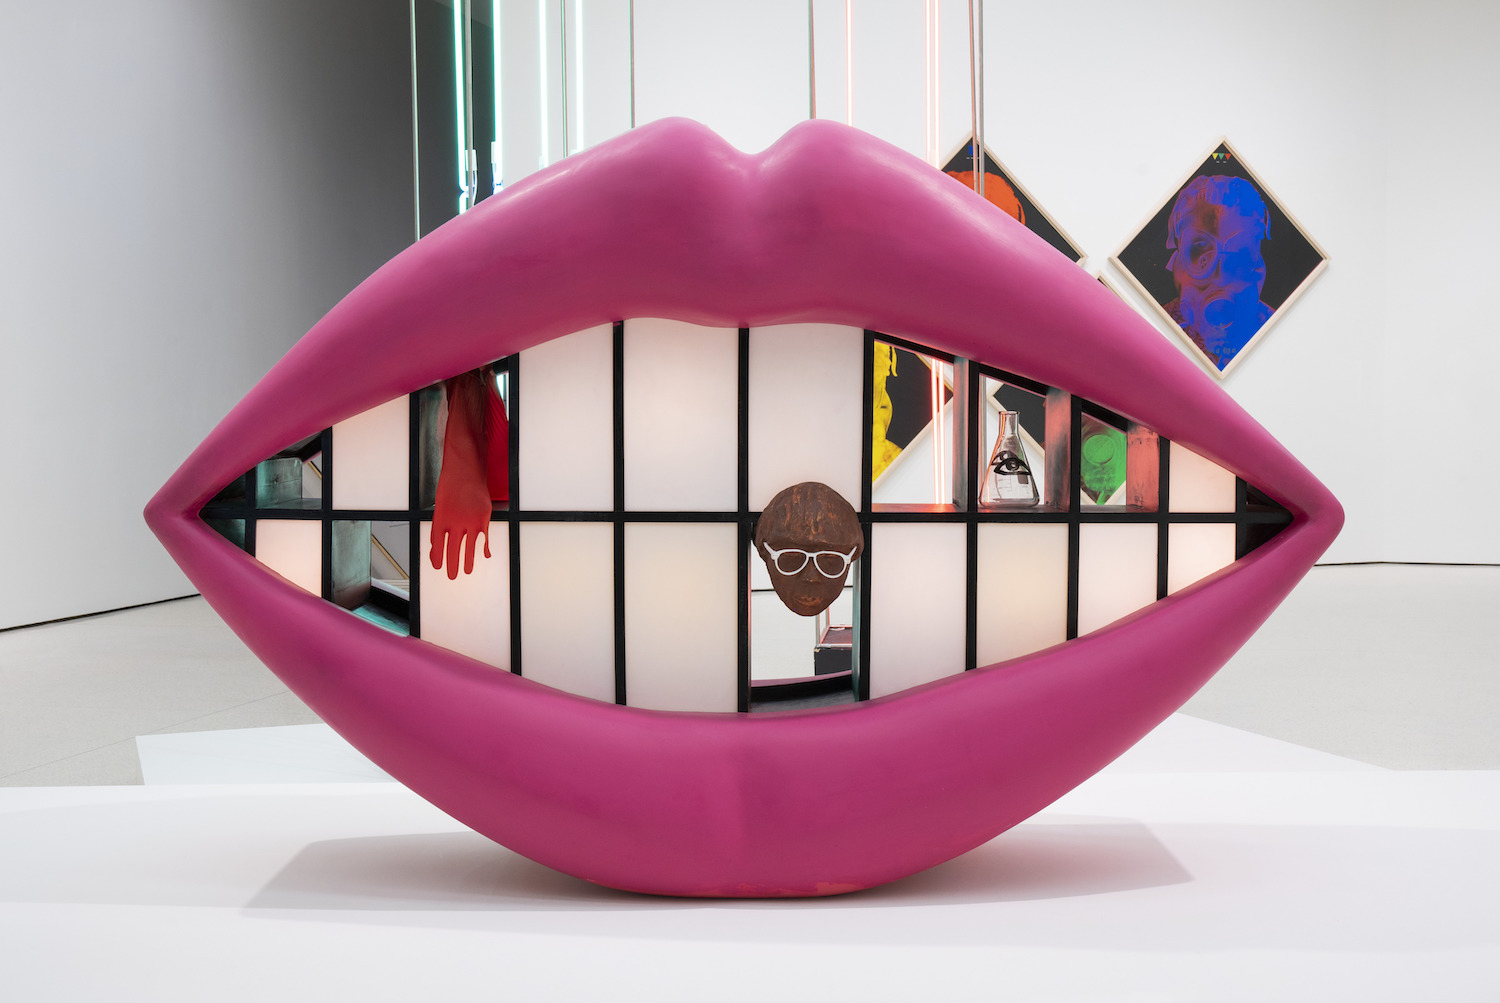 Small statue of a pair of pink lips smiling with teeth and other art pieces inside of the mouth